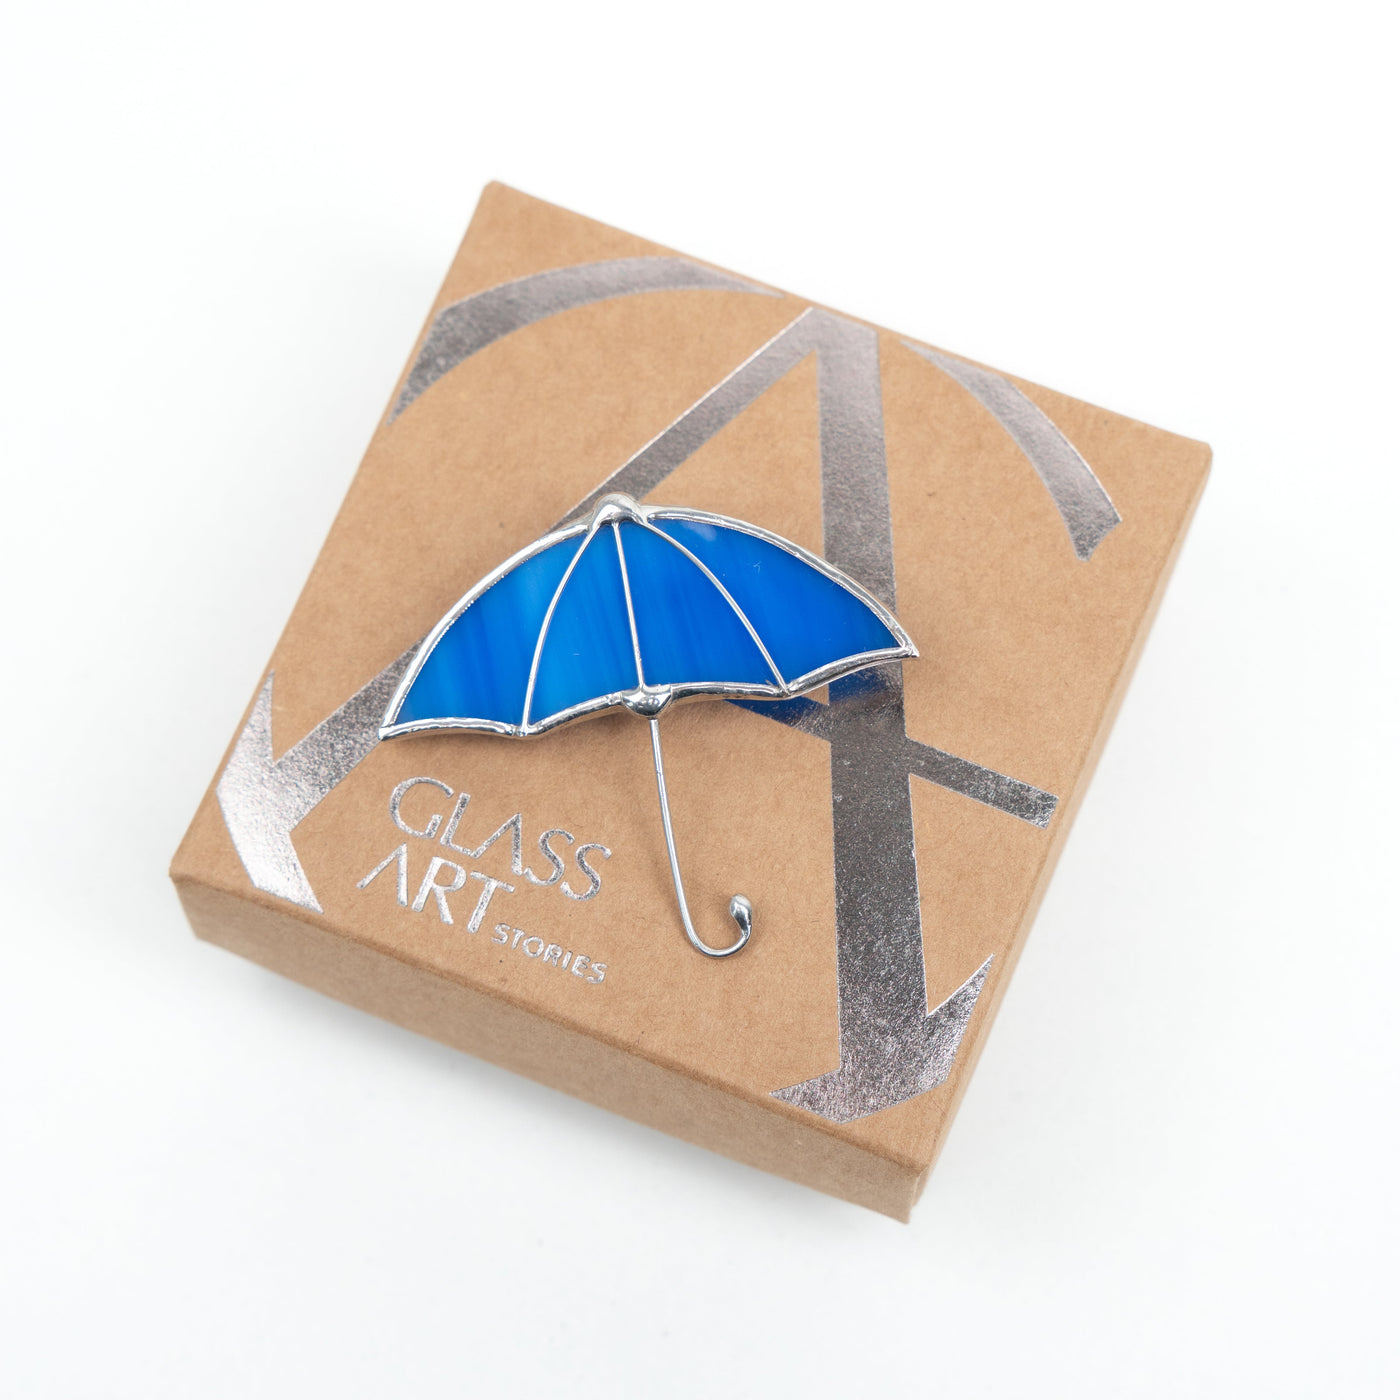 Blue umbrella brooch of stained glass